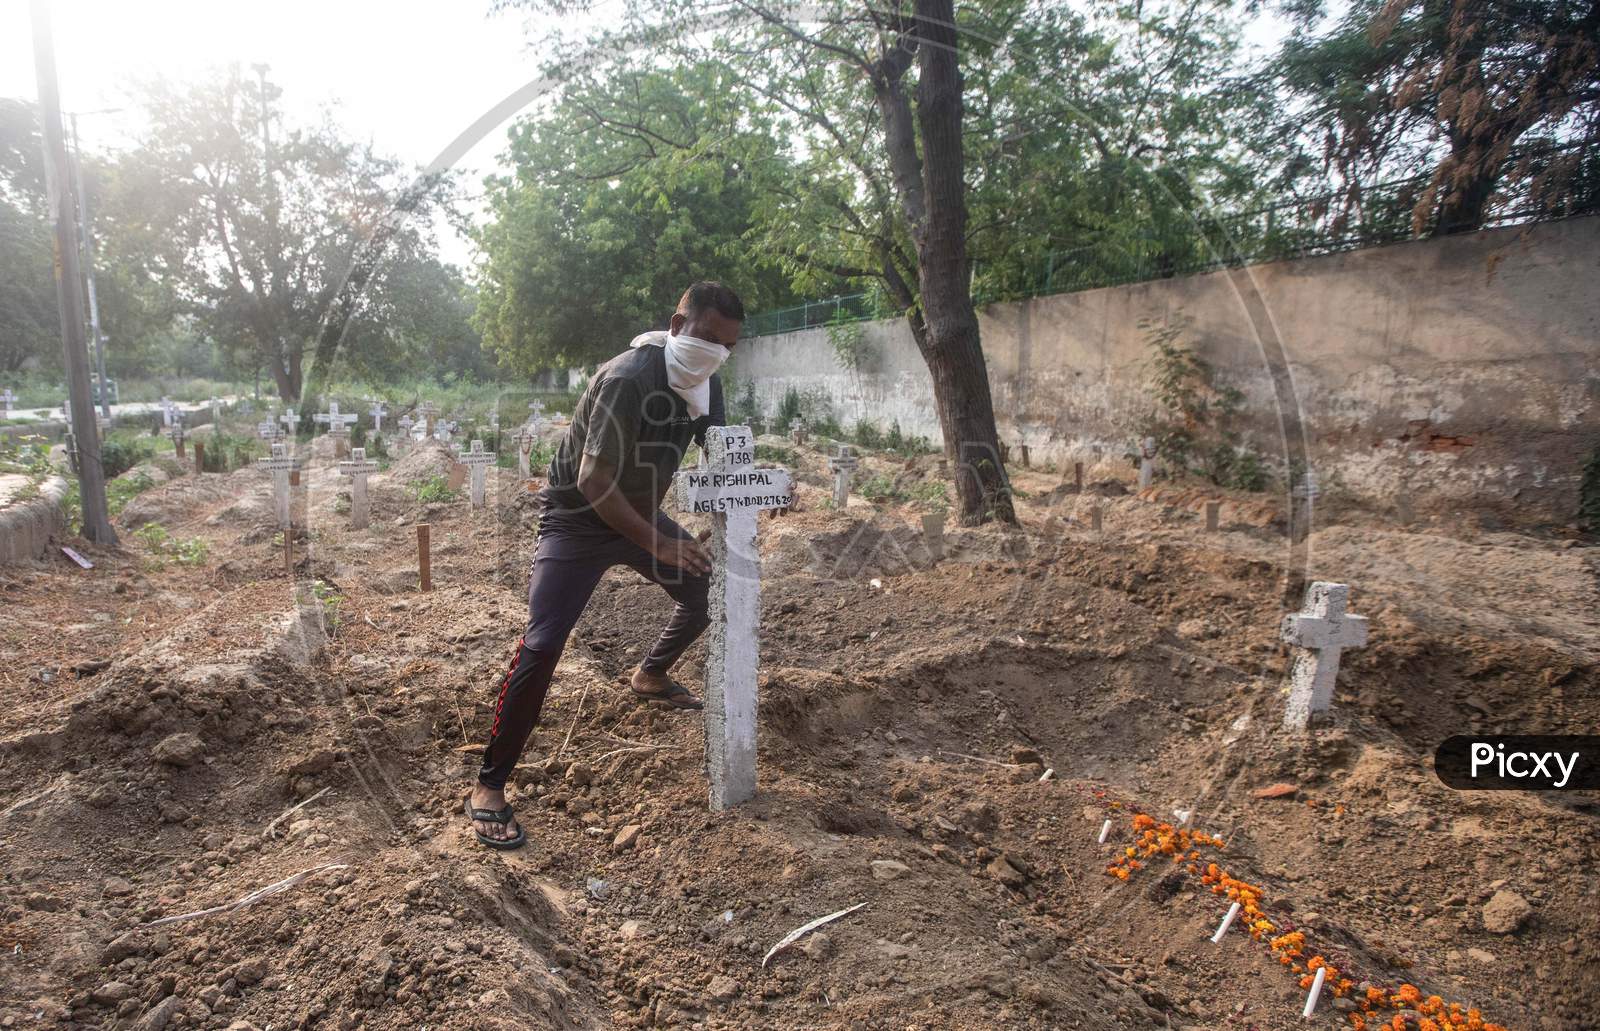 A Cemetery Worker Fixes A Cross Over Newly Dug Graves At Mangolpuri Cemetery Amid The Covid-19 Pandemic On July 1, 2020 In New Delhi, India.